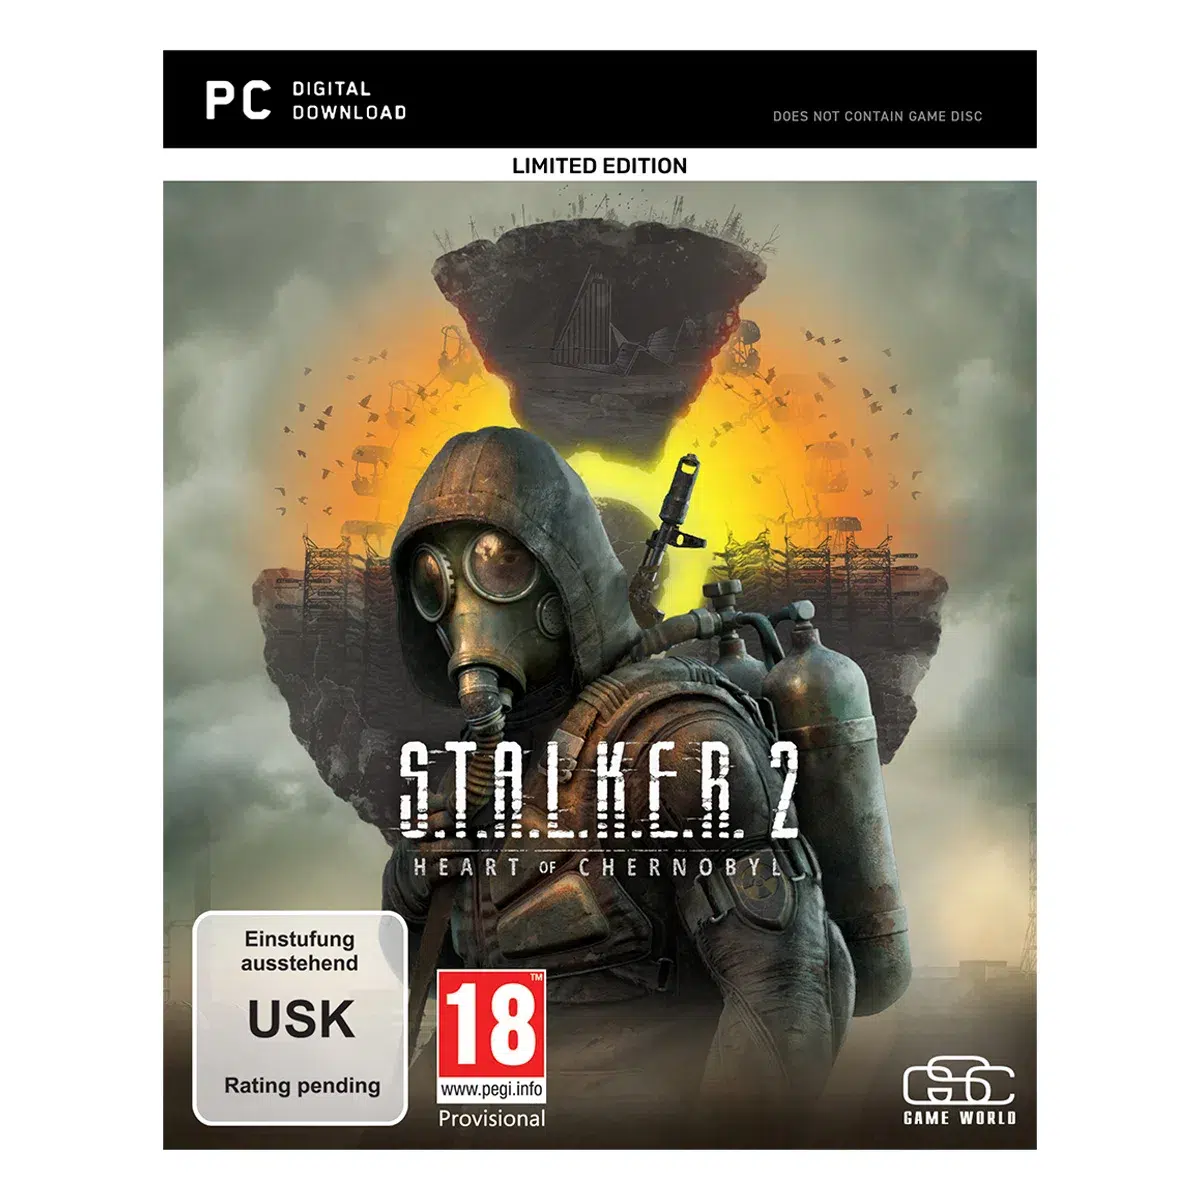 S.T.A.L.K.E.R. 2: Heart of Chornobyl Limited Edition (PC)